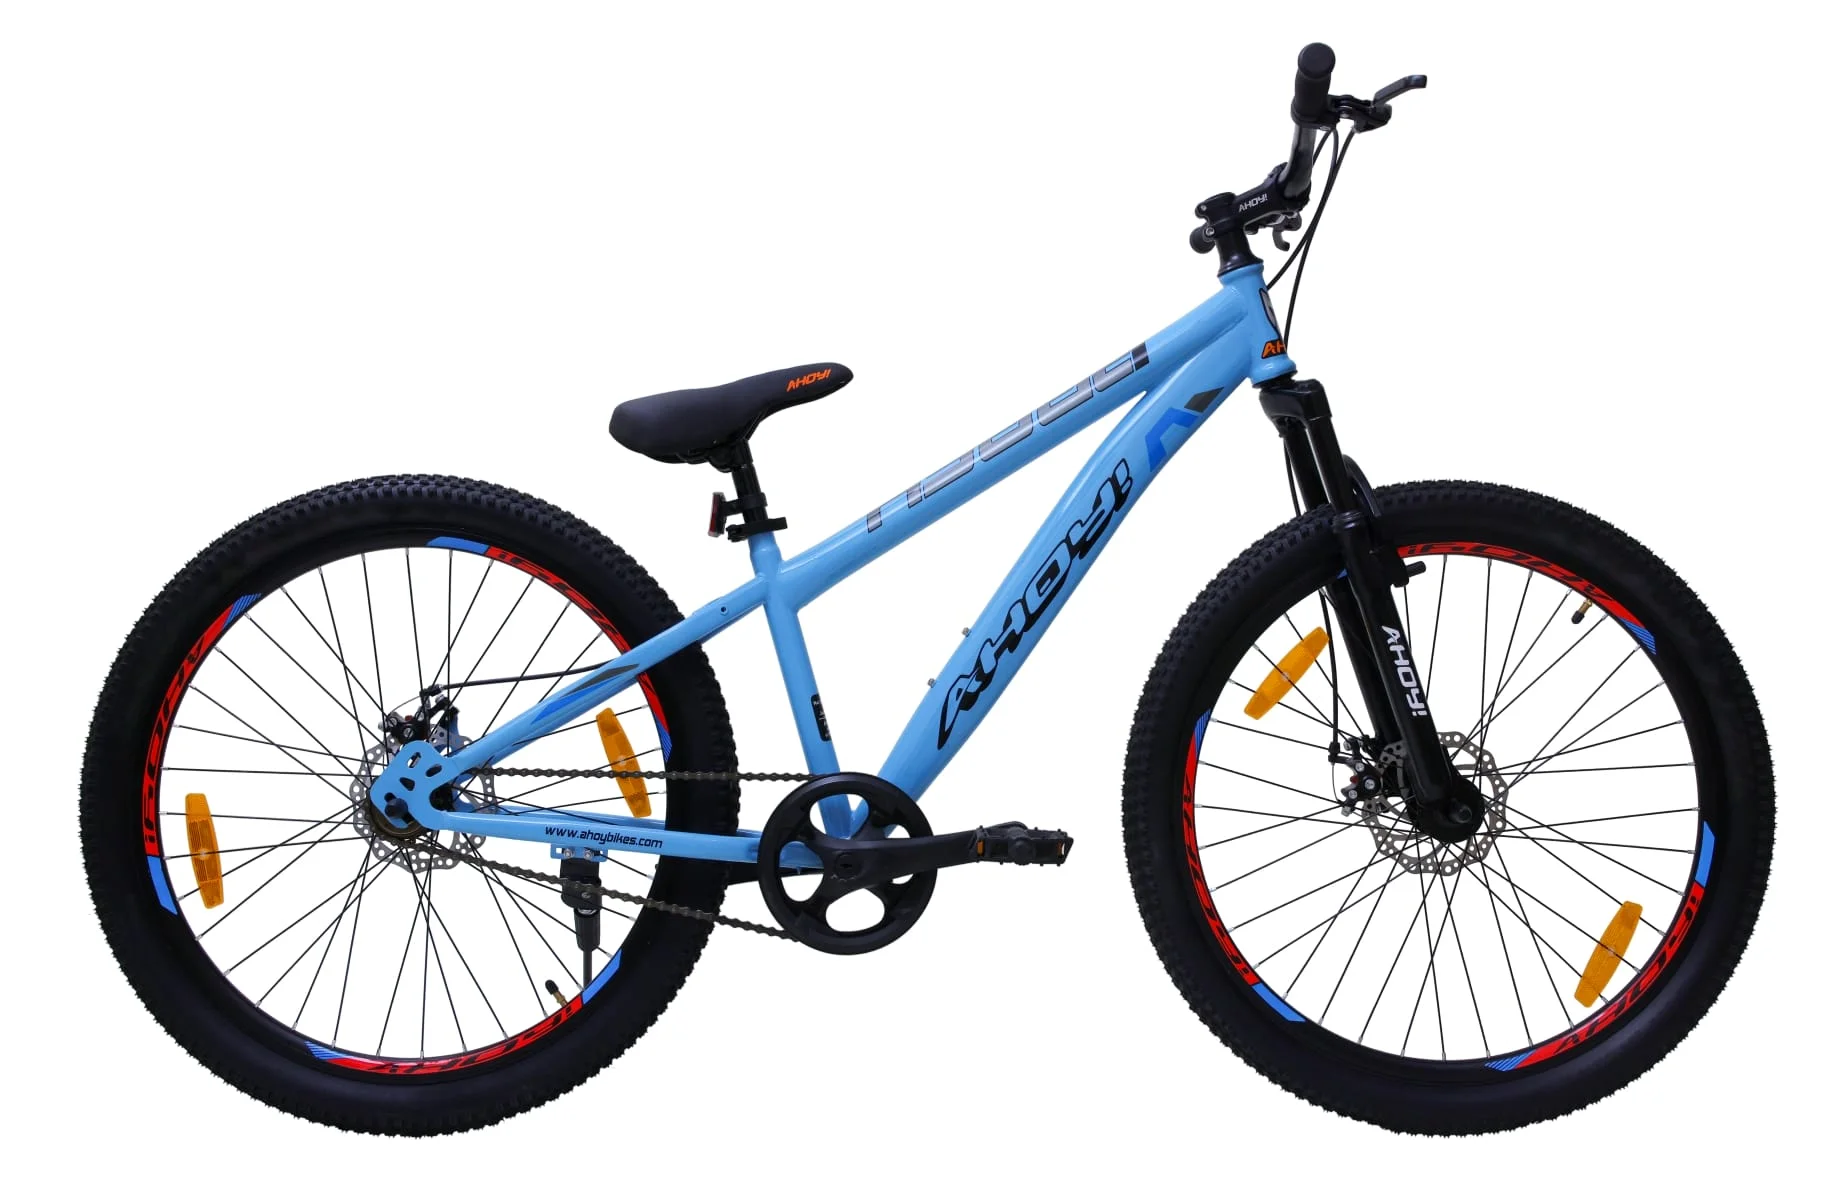 Brash Bike Without Gear 24T | Buy Blue Non Gear Cycle for Men